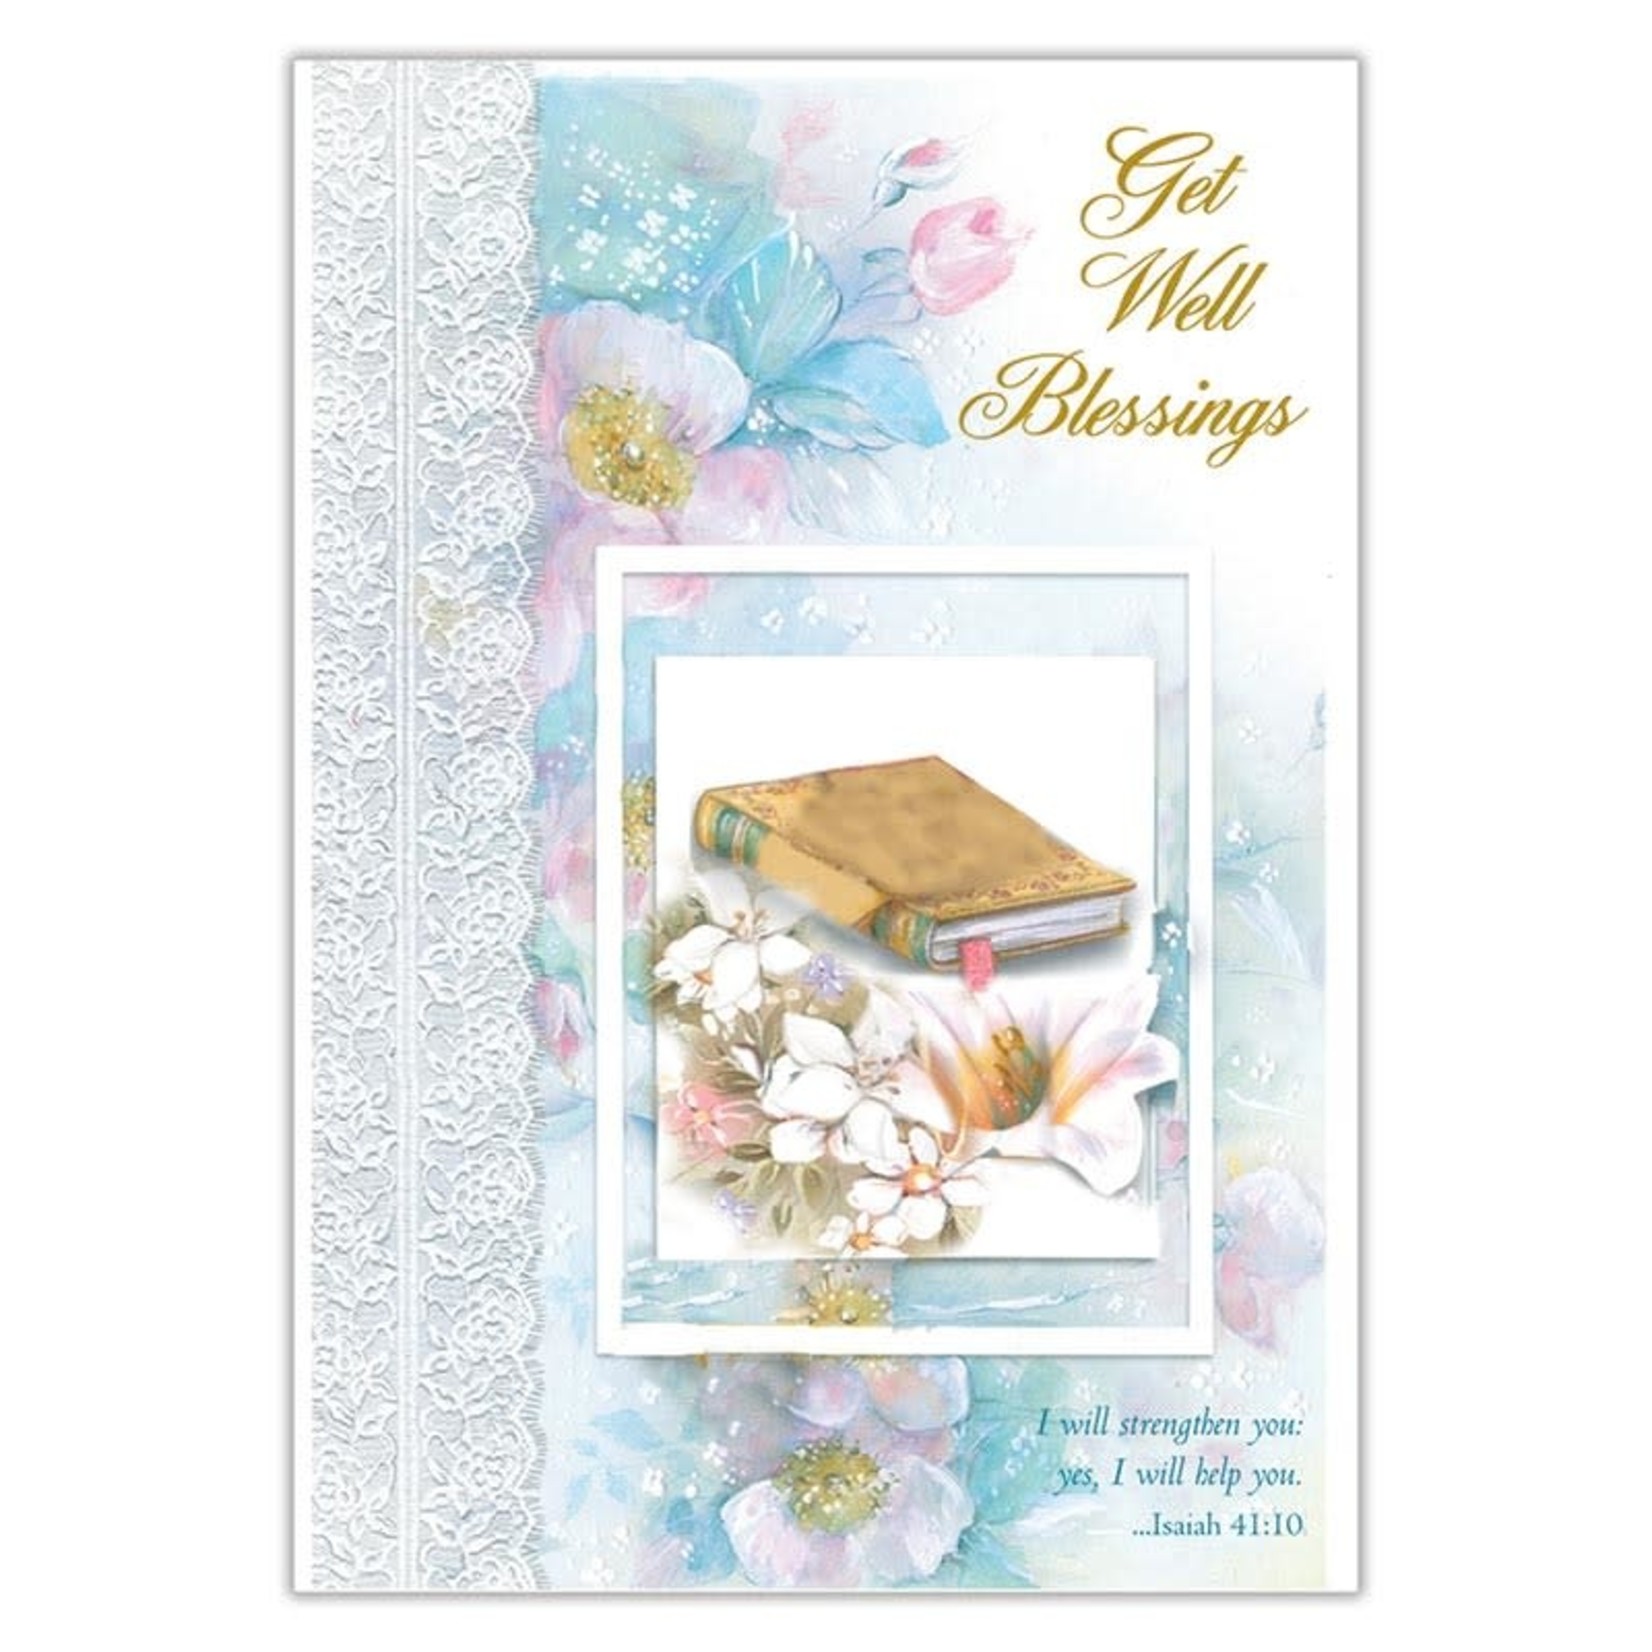 Greeting Card- Get Well Blessings